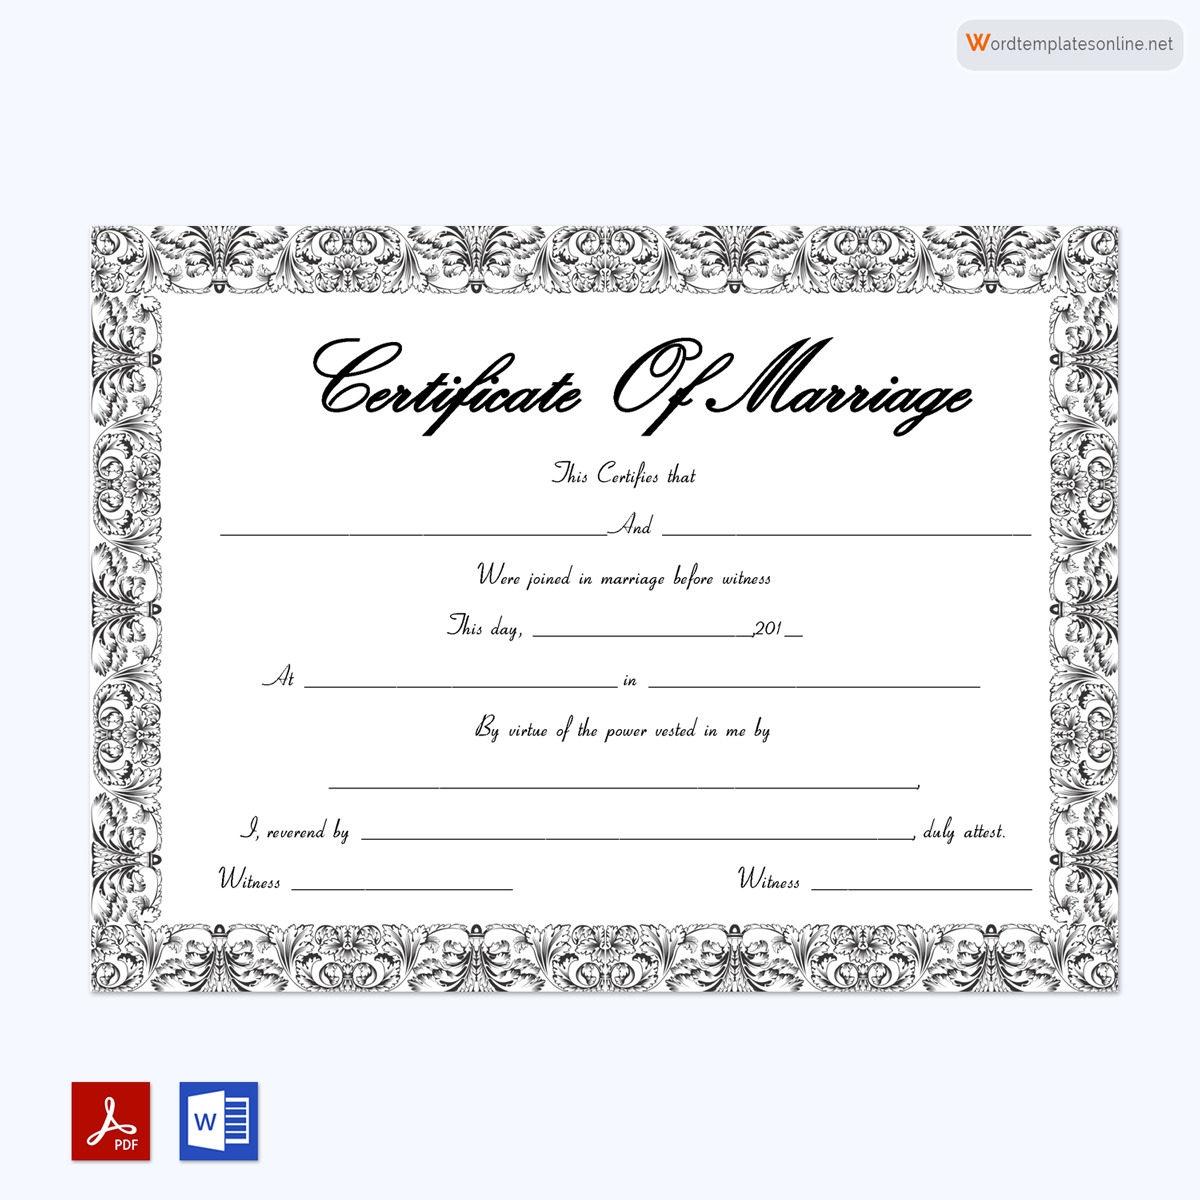  marriage certificate online fake 0912